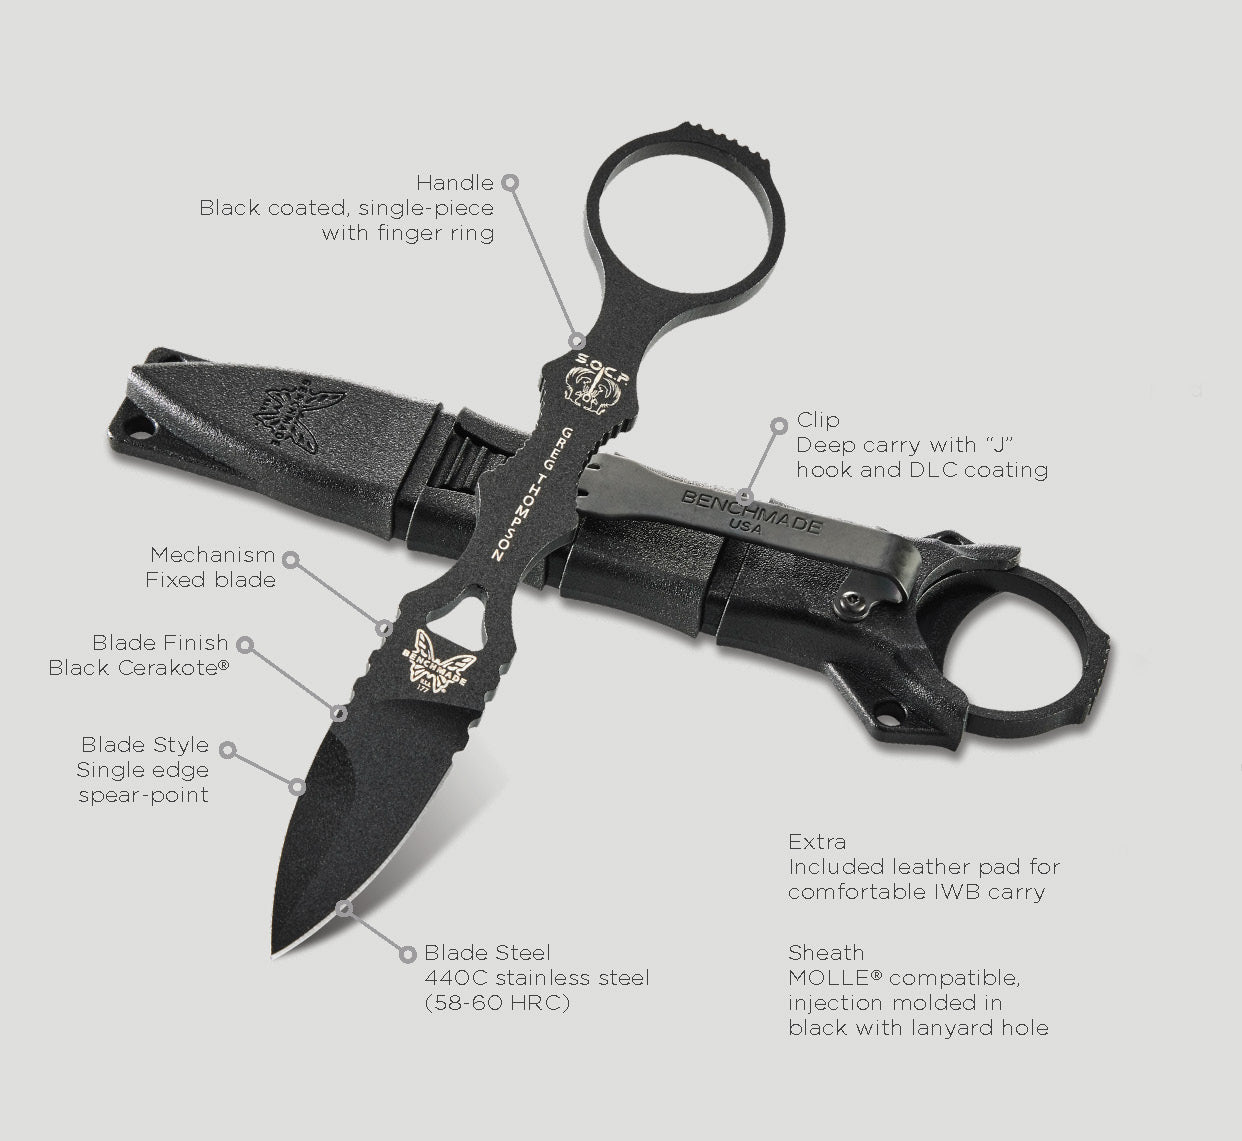 Benchmade 177BK Thompson Mini SOCP (Special Operations Combatives Program) - Spear Point Fixed Blade with Sheath - Wander Outdoors